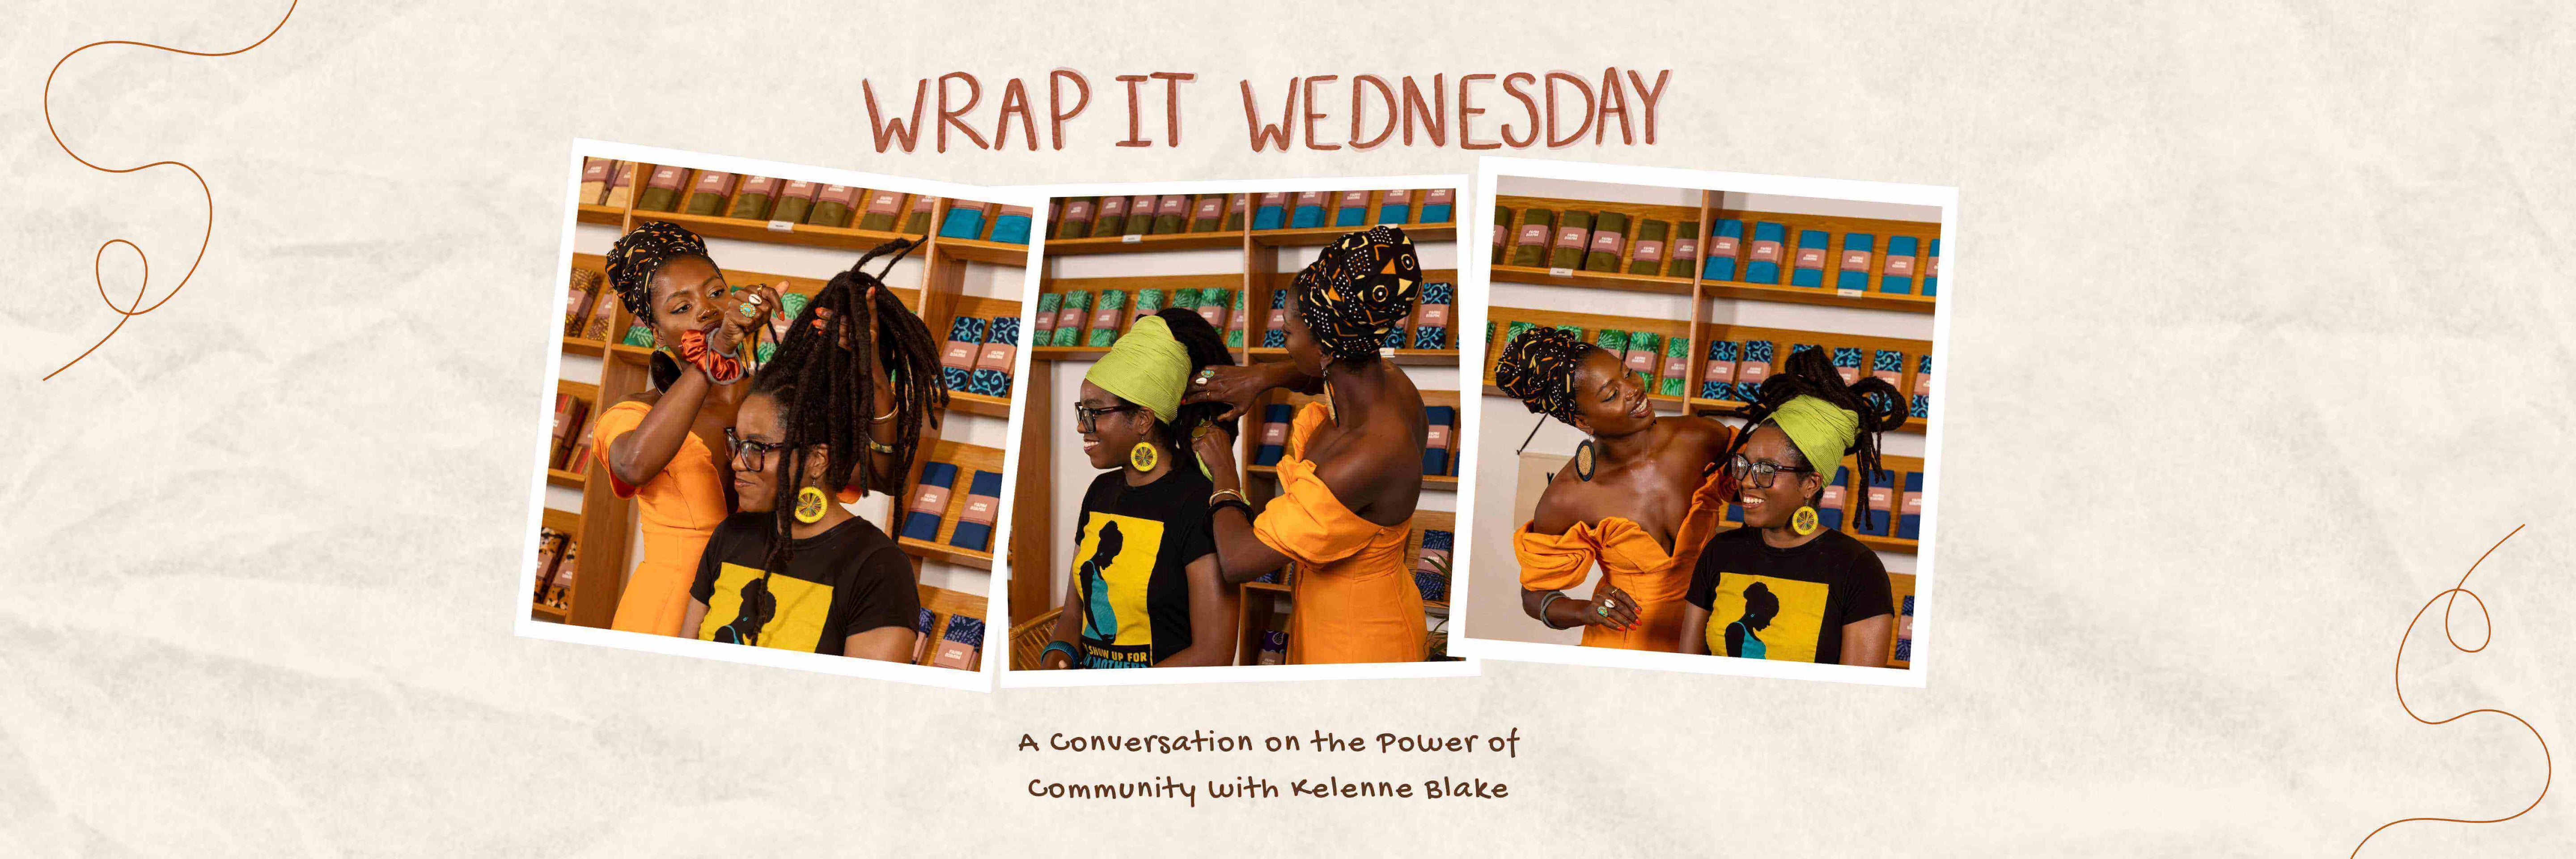 Wrap it Wednesday: A Conversation on the Power of Community with Kelenne Blake